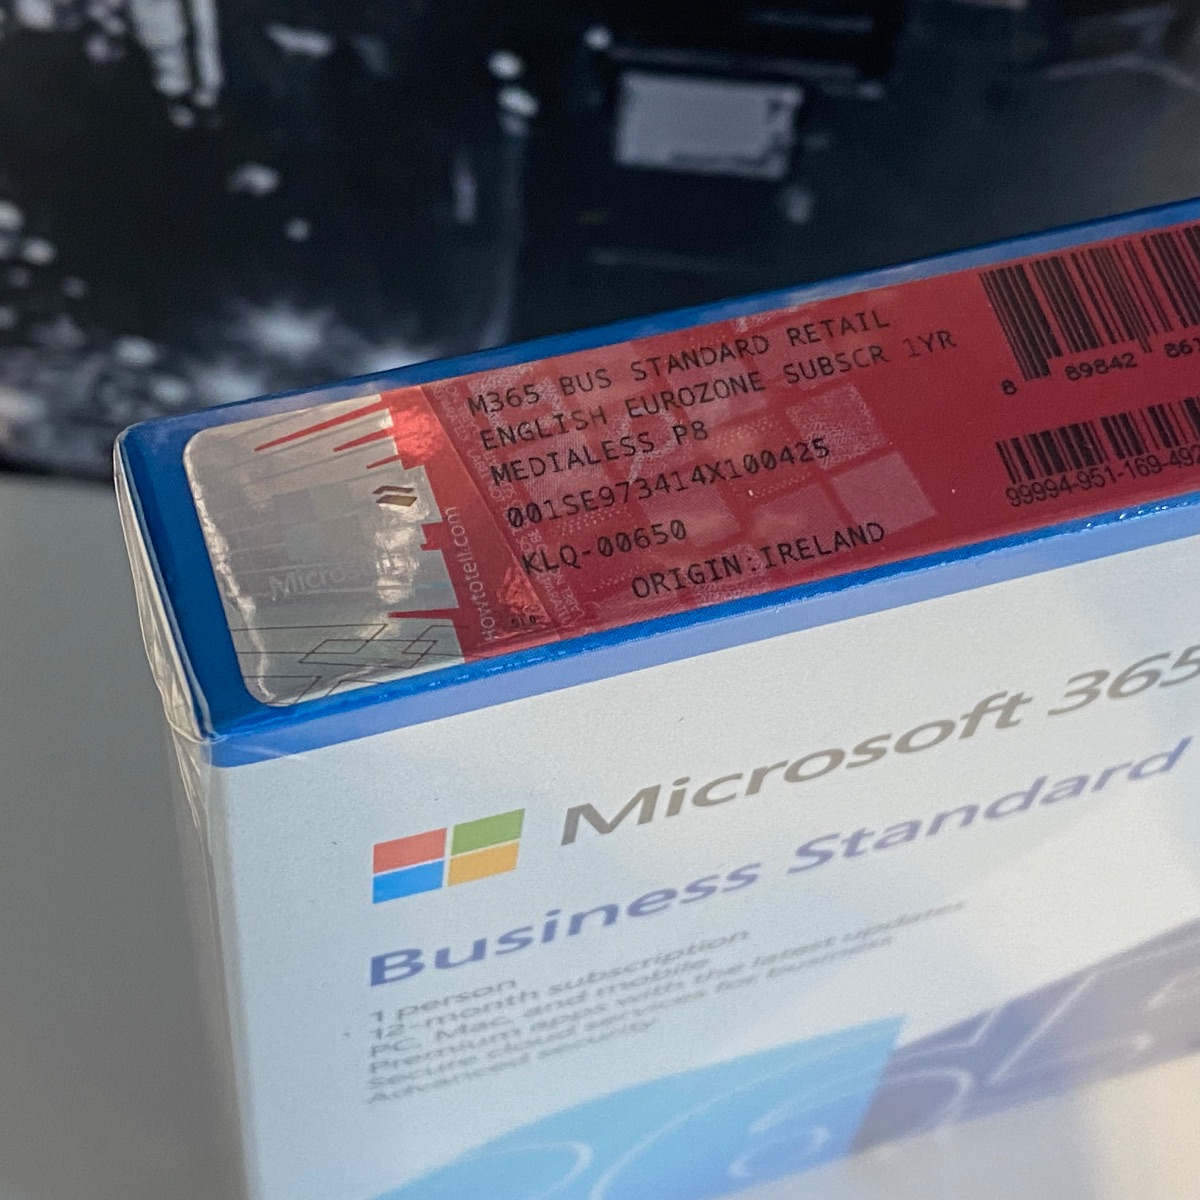 Microsoft Office 365 Business Standard Subscription Word Excel Outlook Sealed KLQ-00650 889842861259 (Brand New & Sealed)